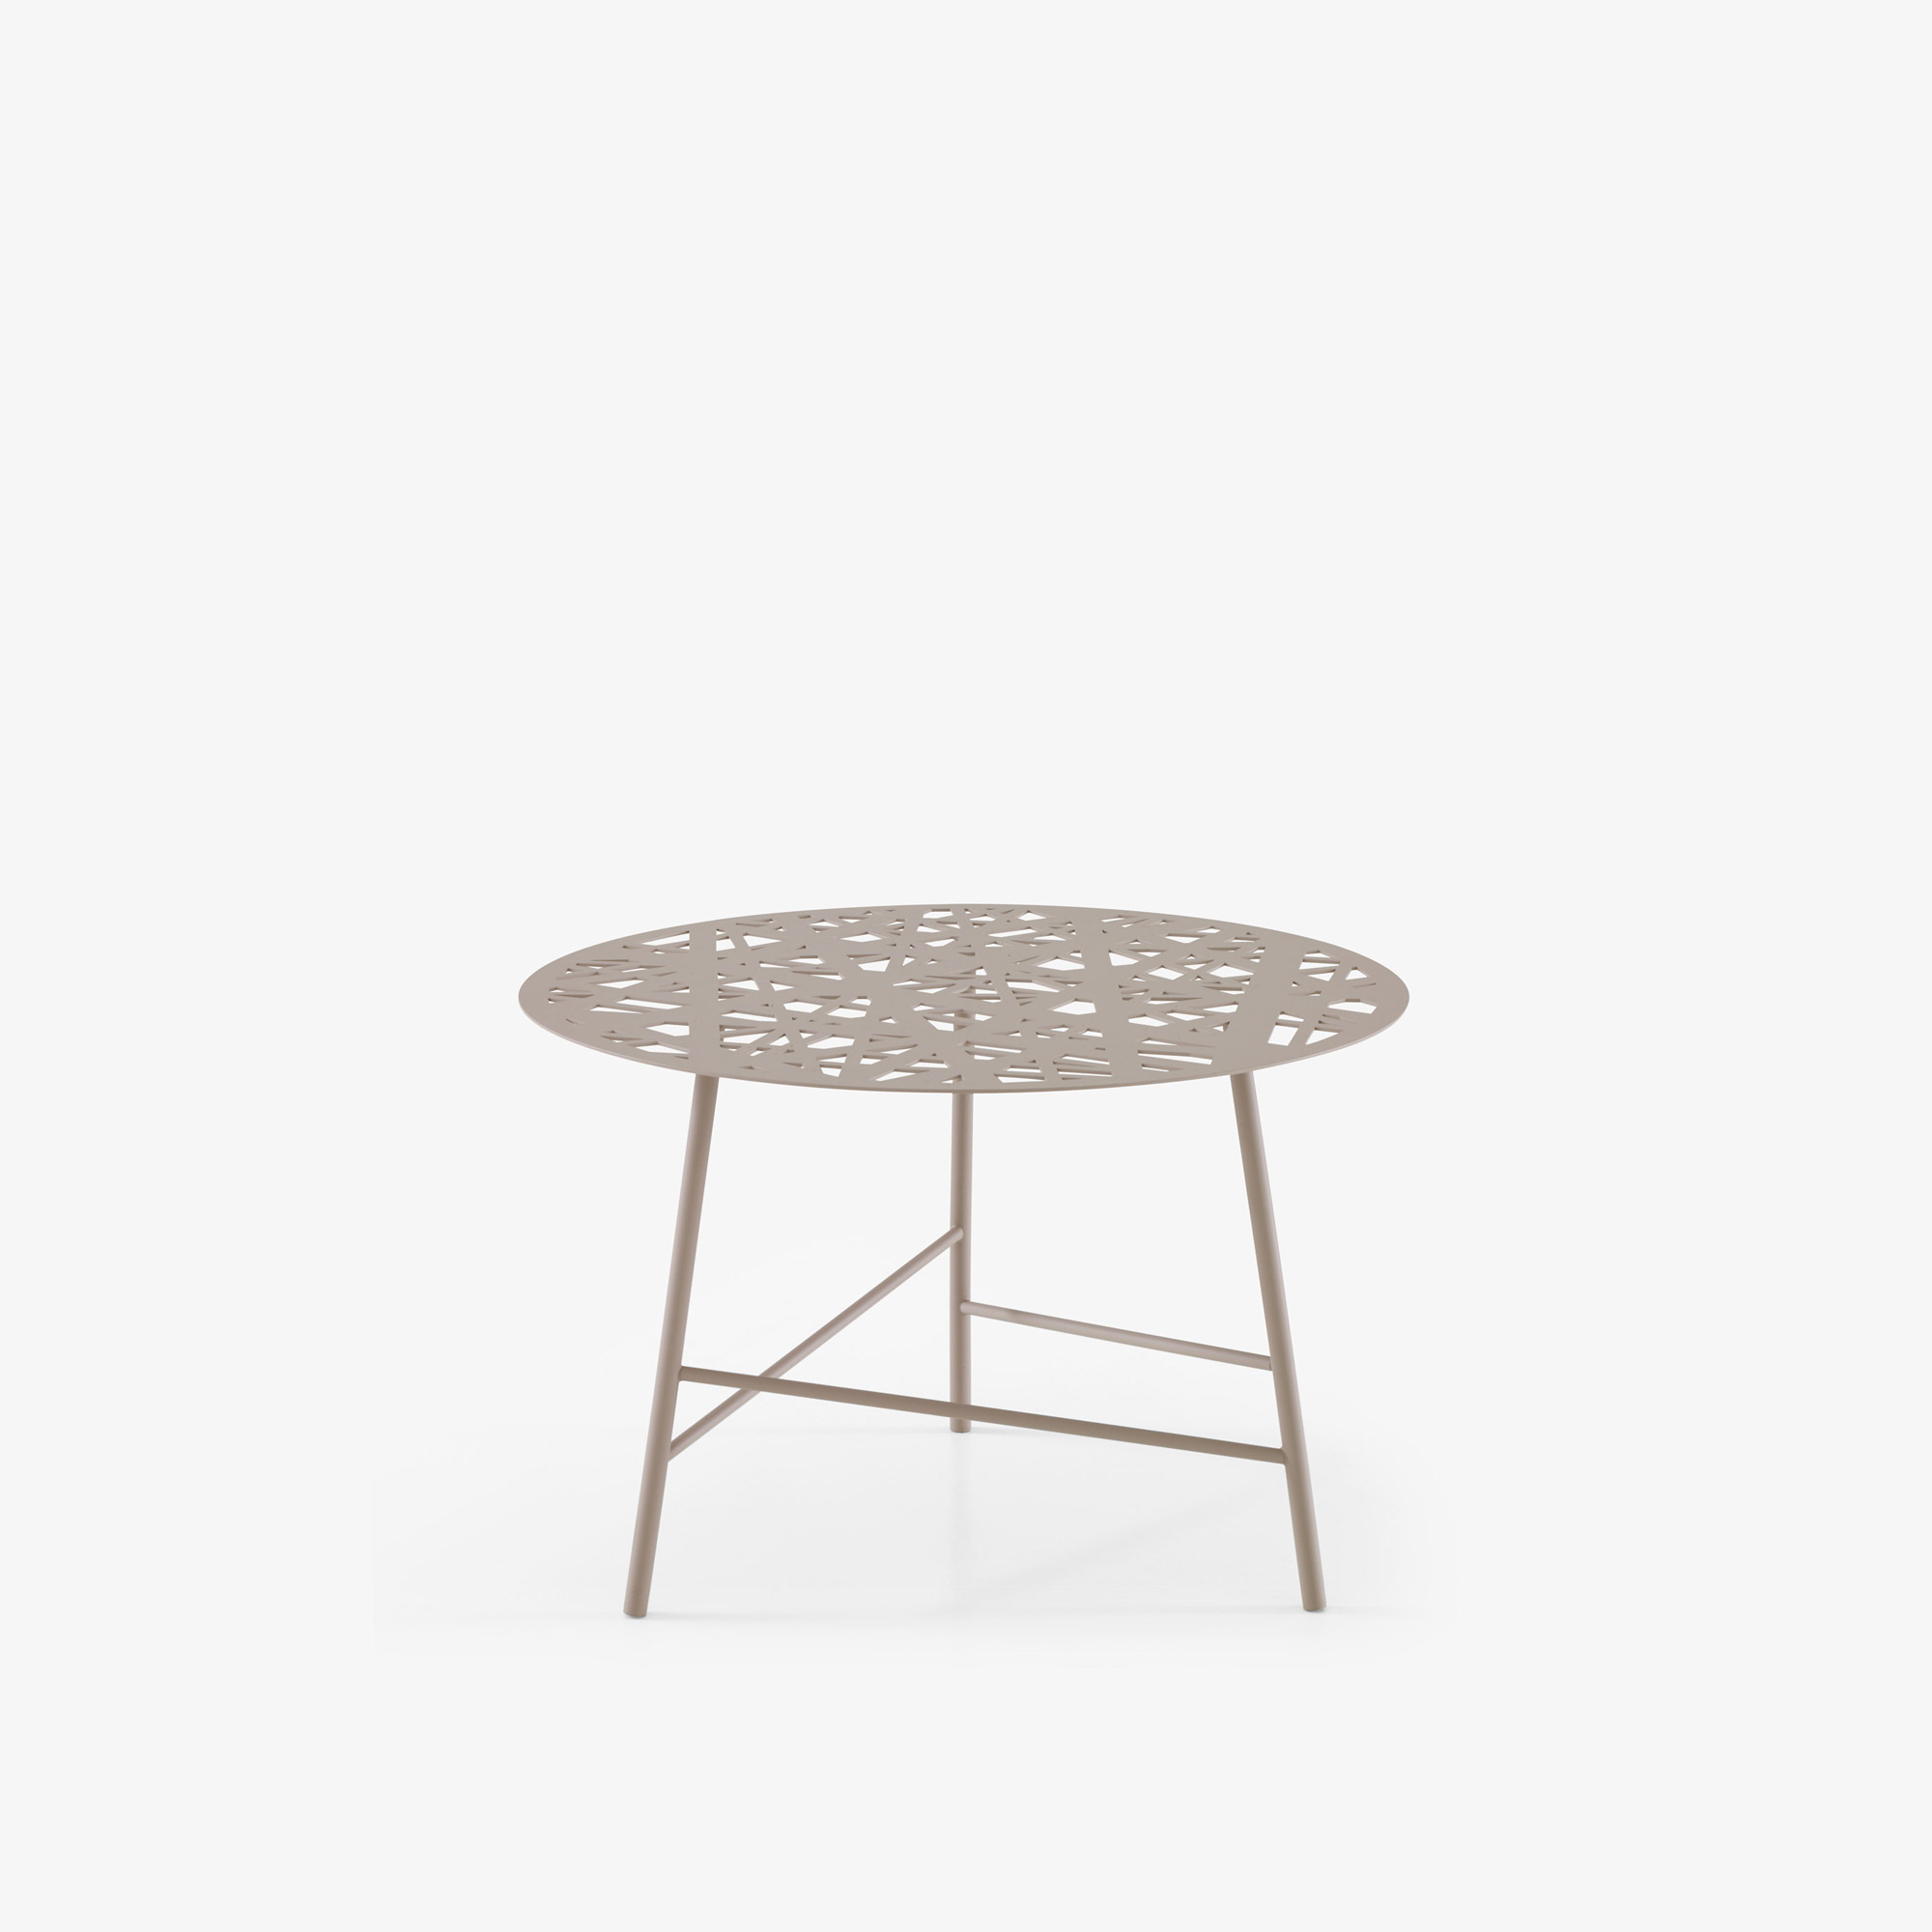 Image OCCASIONAL TABLE ARGILE LACQUER INDOOR / OUTDOOR